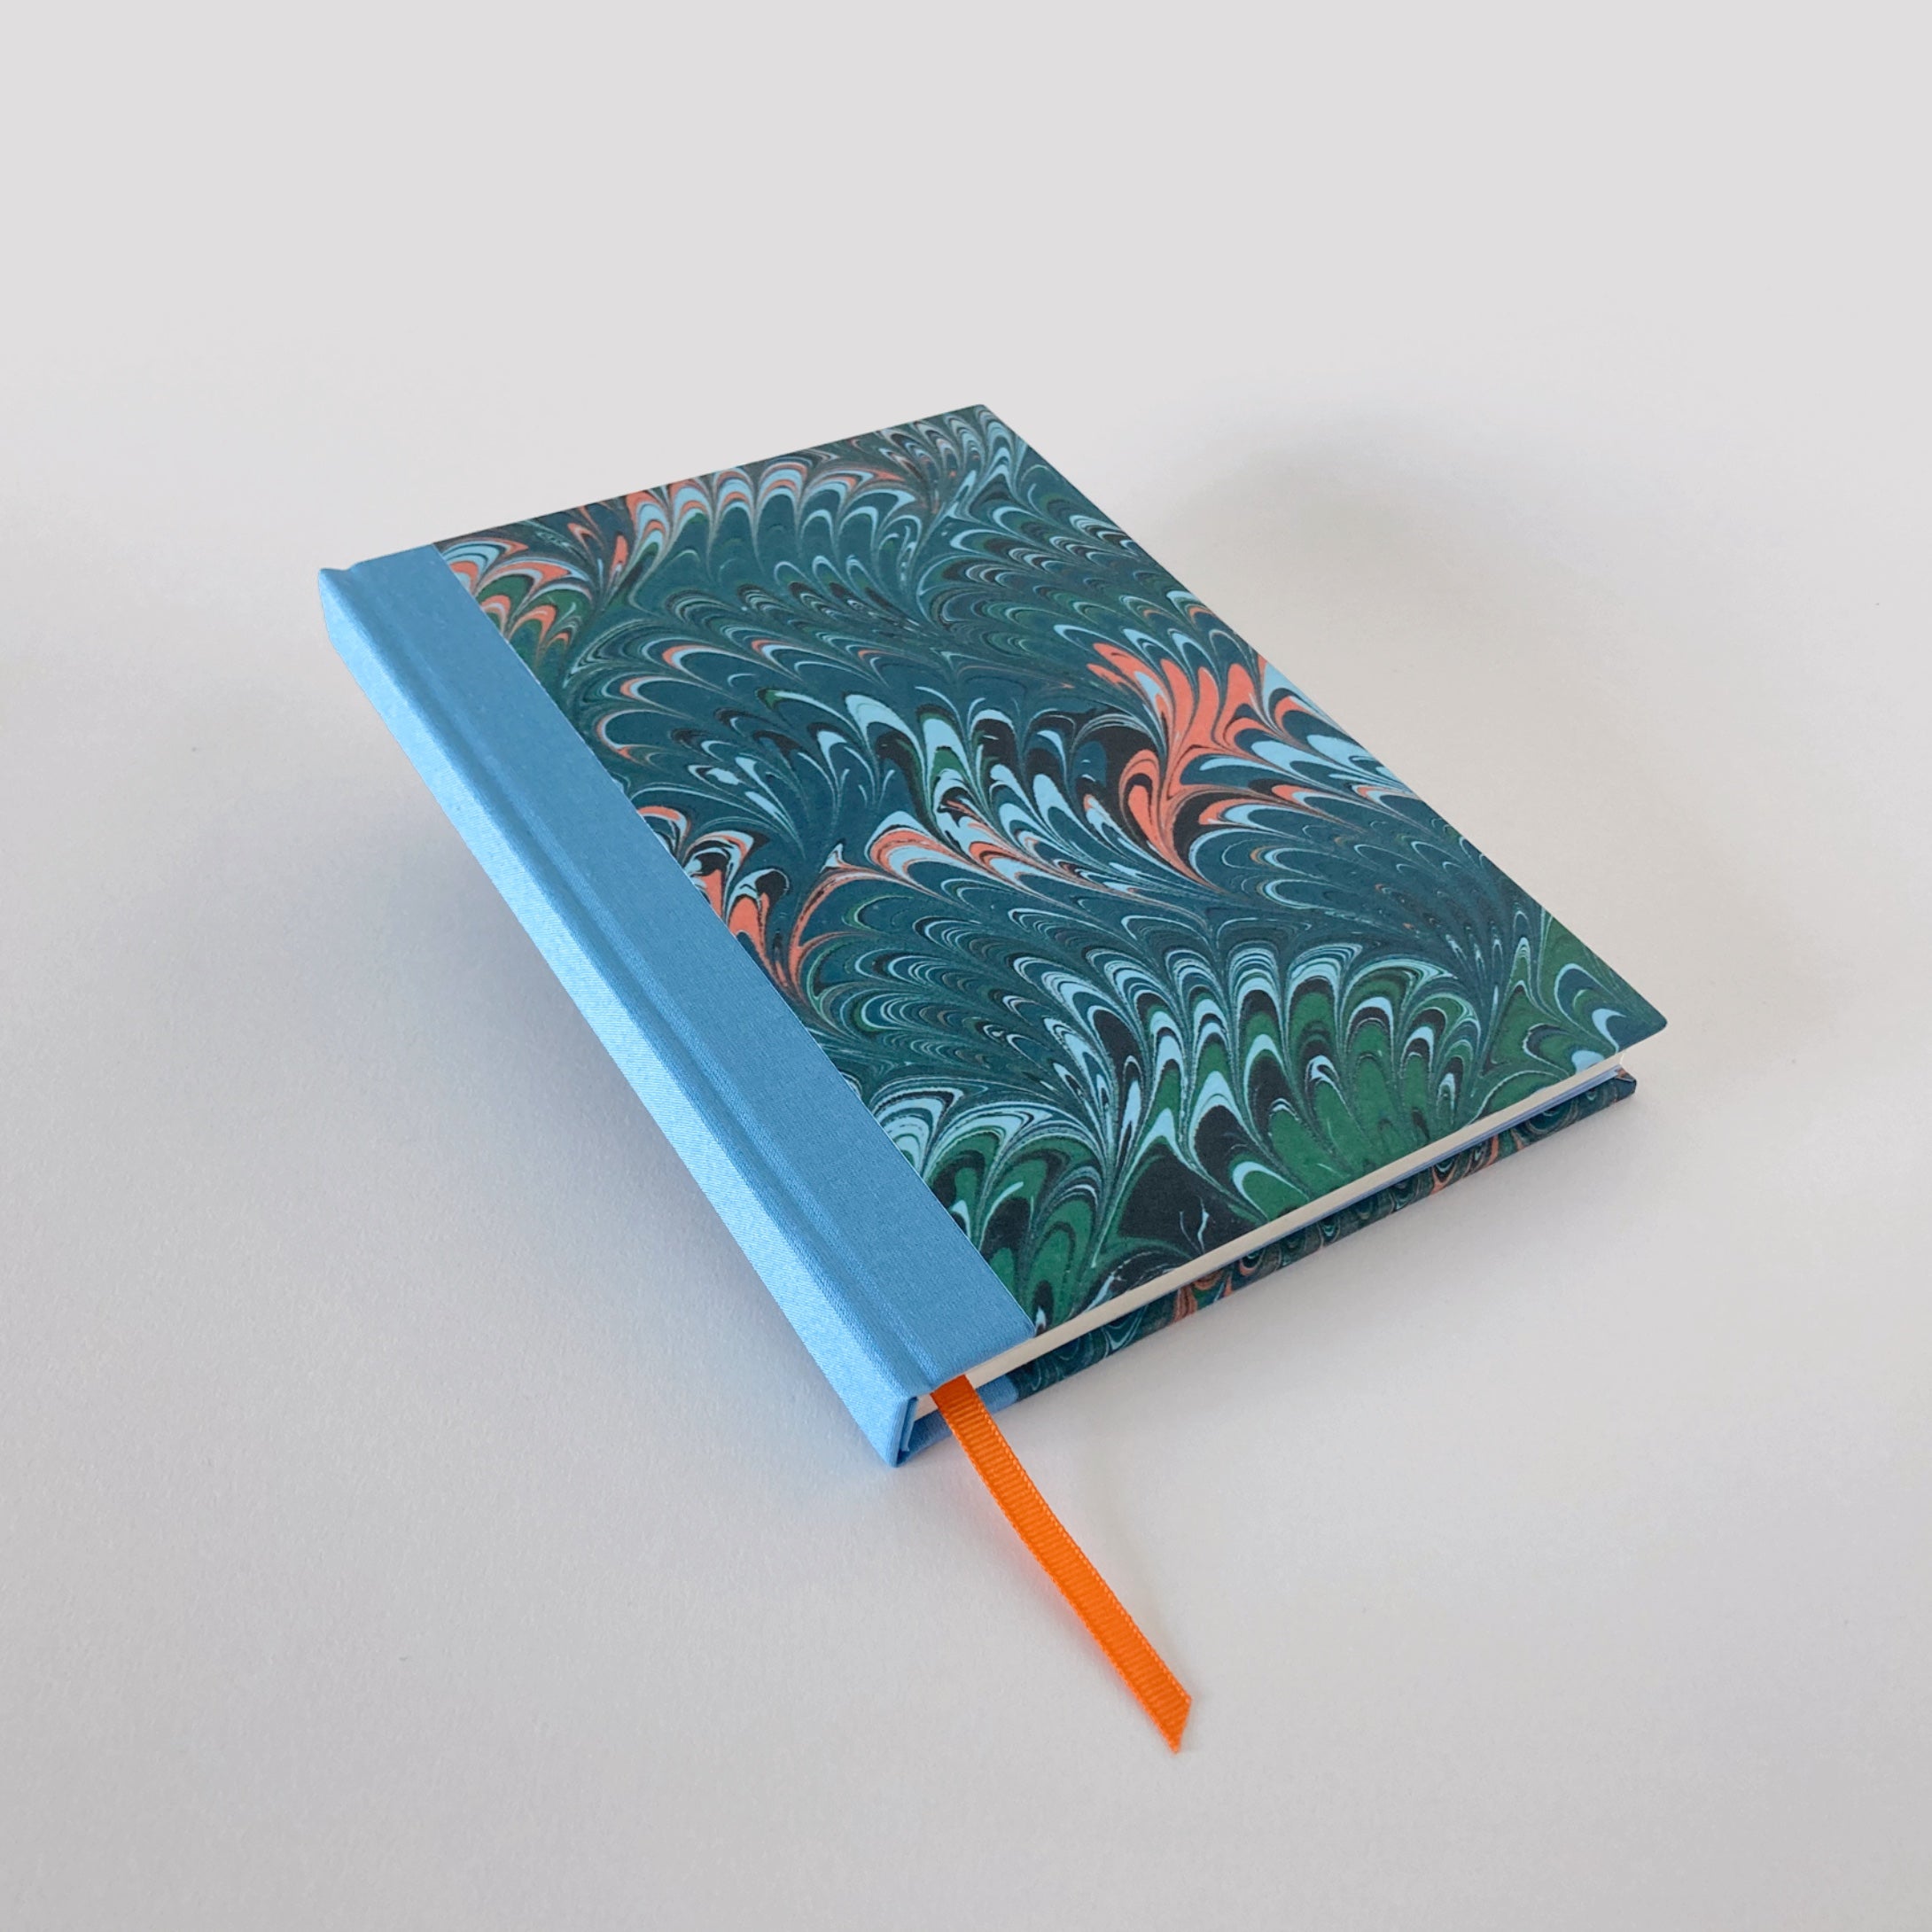 Green marble hardback notebook with blue cloth spine and orange ribbon bookmark.